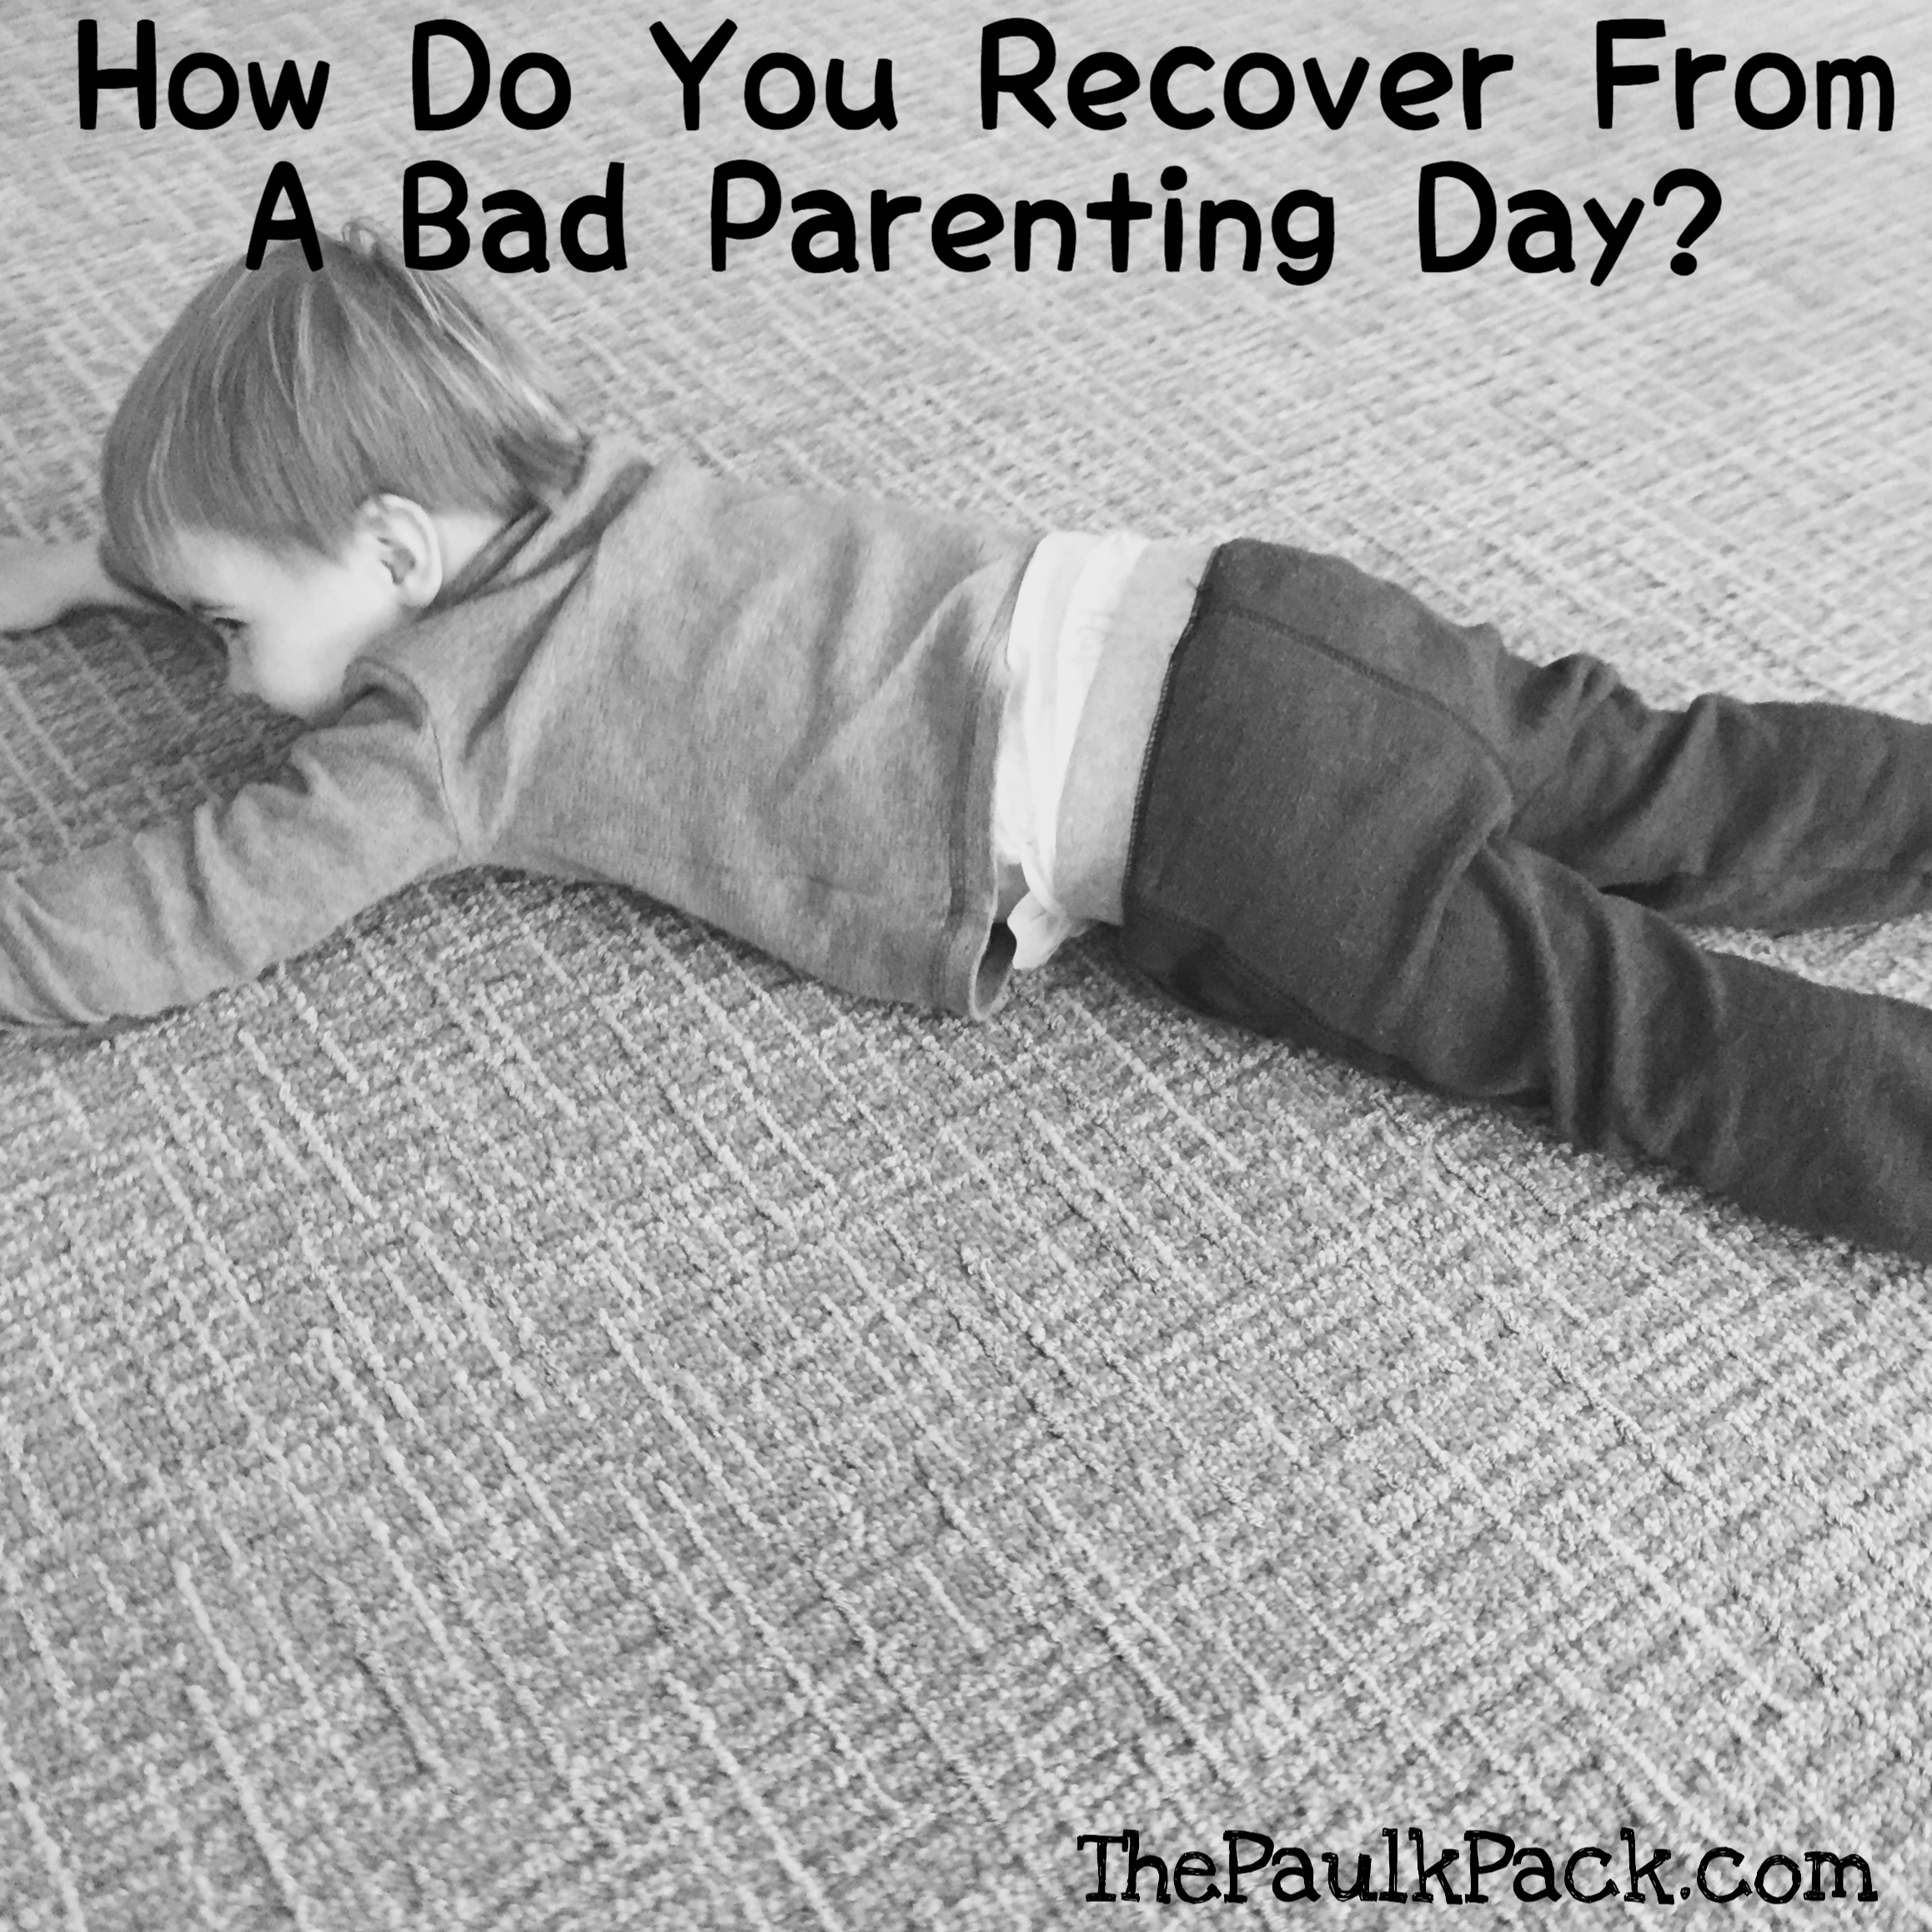 How Do You Recover From A Bad Parenting Day?